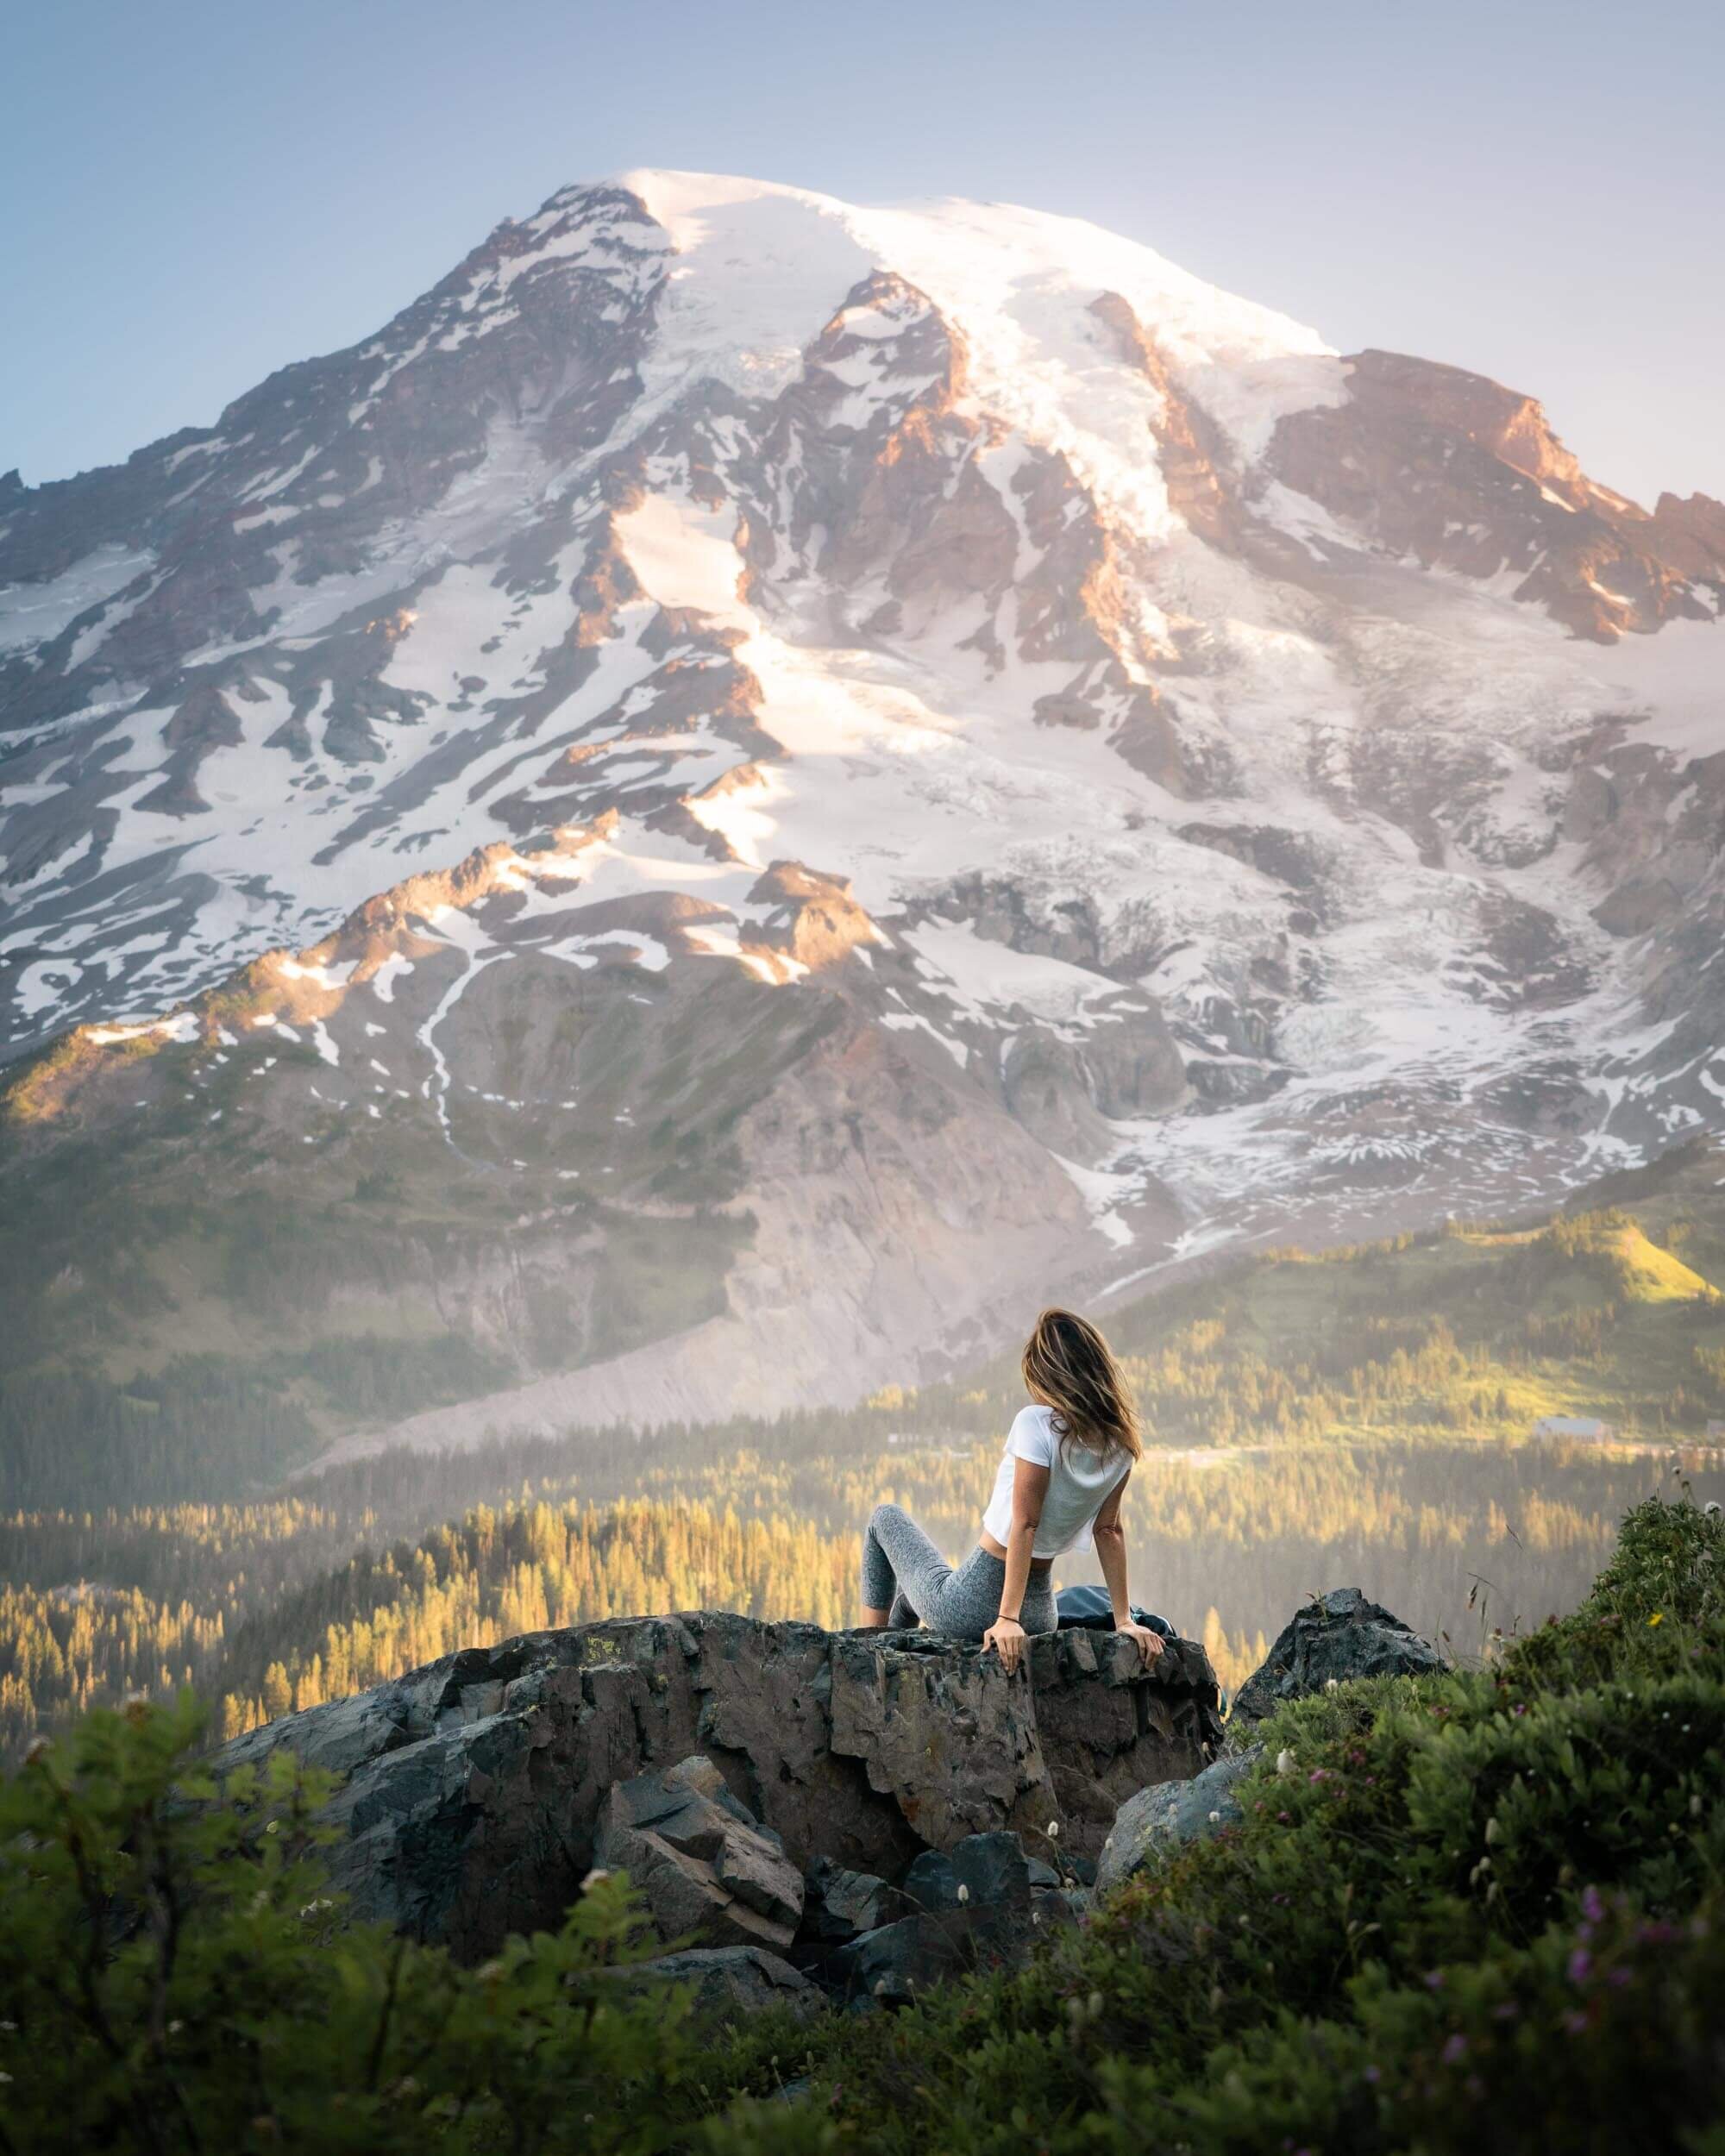 Expansive views of Mount Rainier at sunrise from the Paradise side of the Mountain.